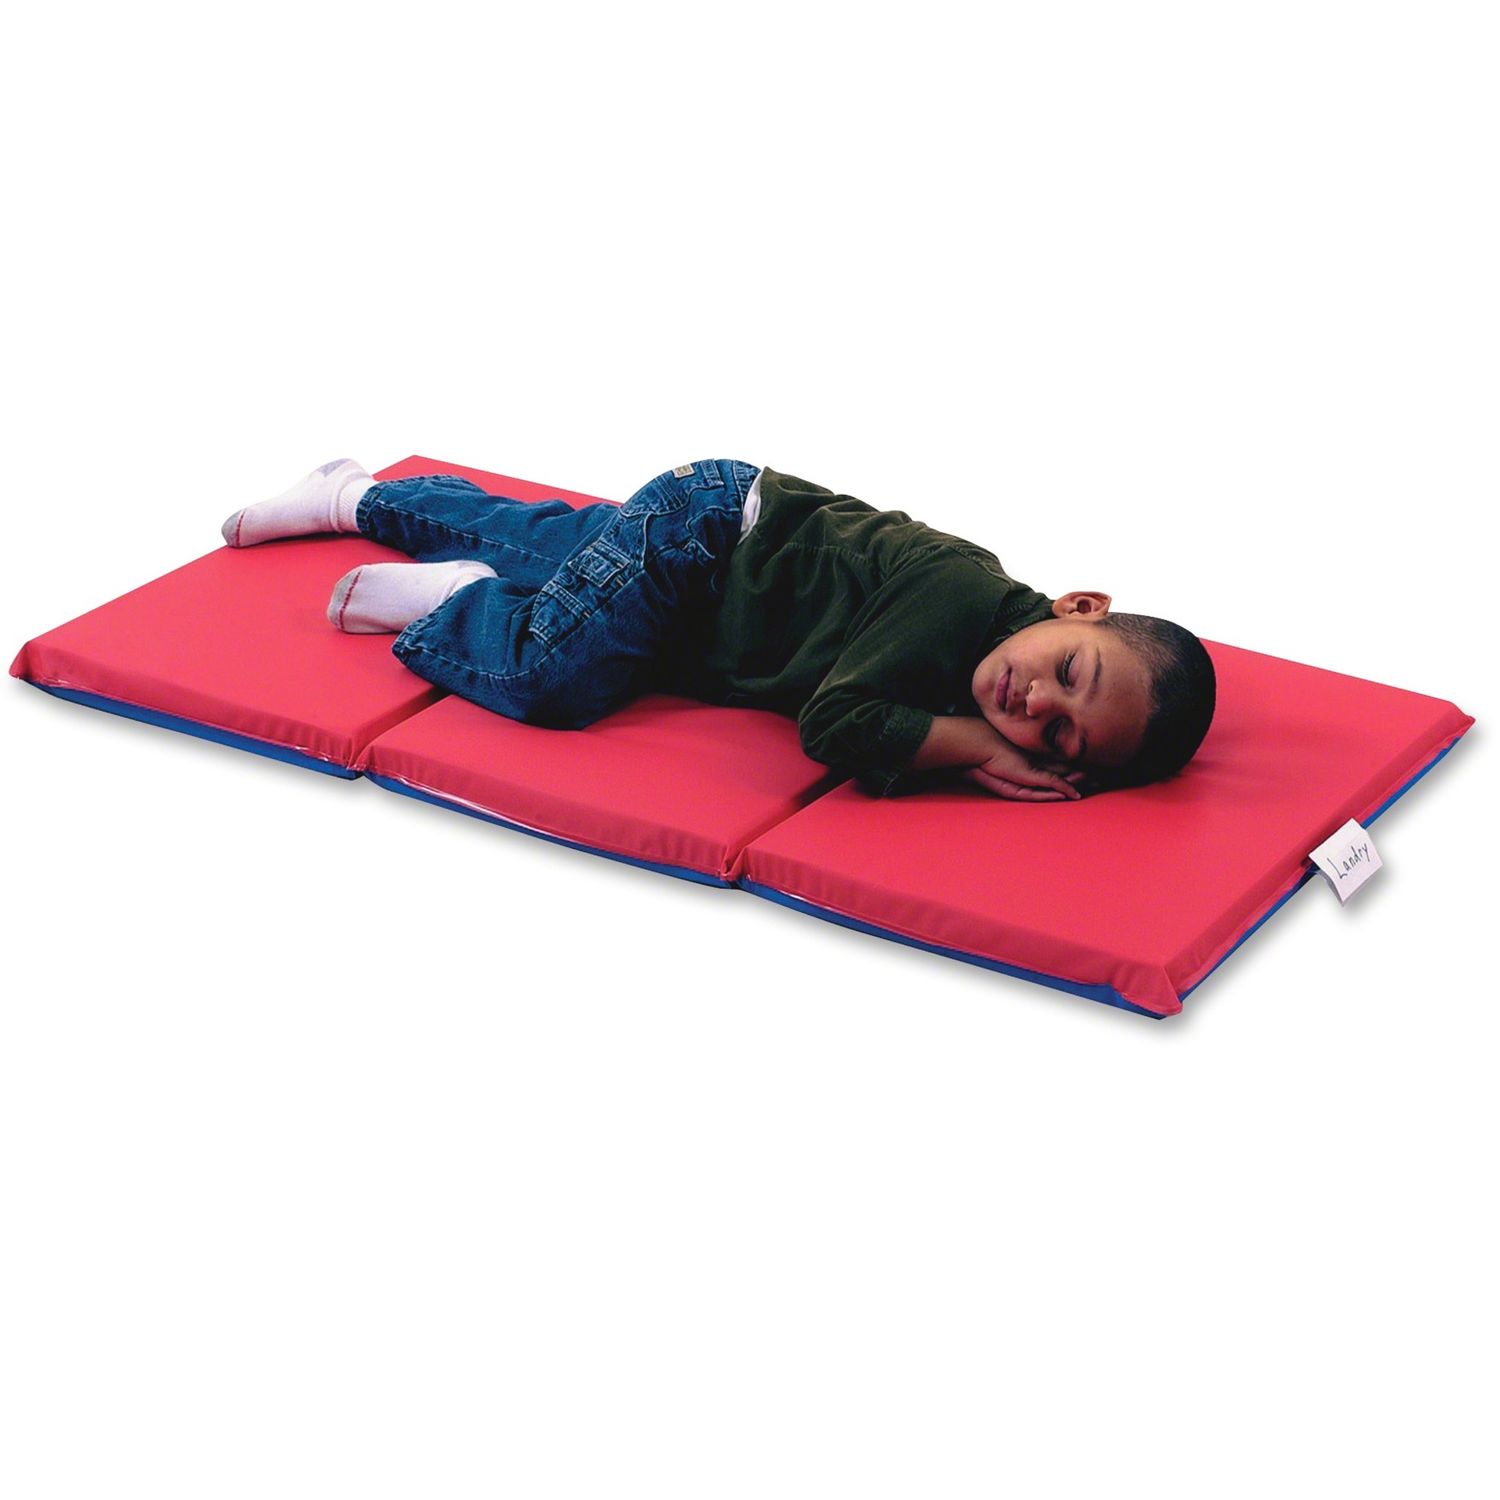 3-section Infection Control Mat 48" Length x 24" Width x 1" Thickness, Rectangle, Vinyl, Red, Blue